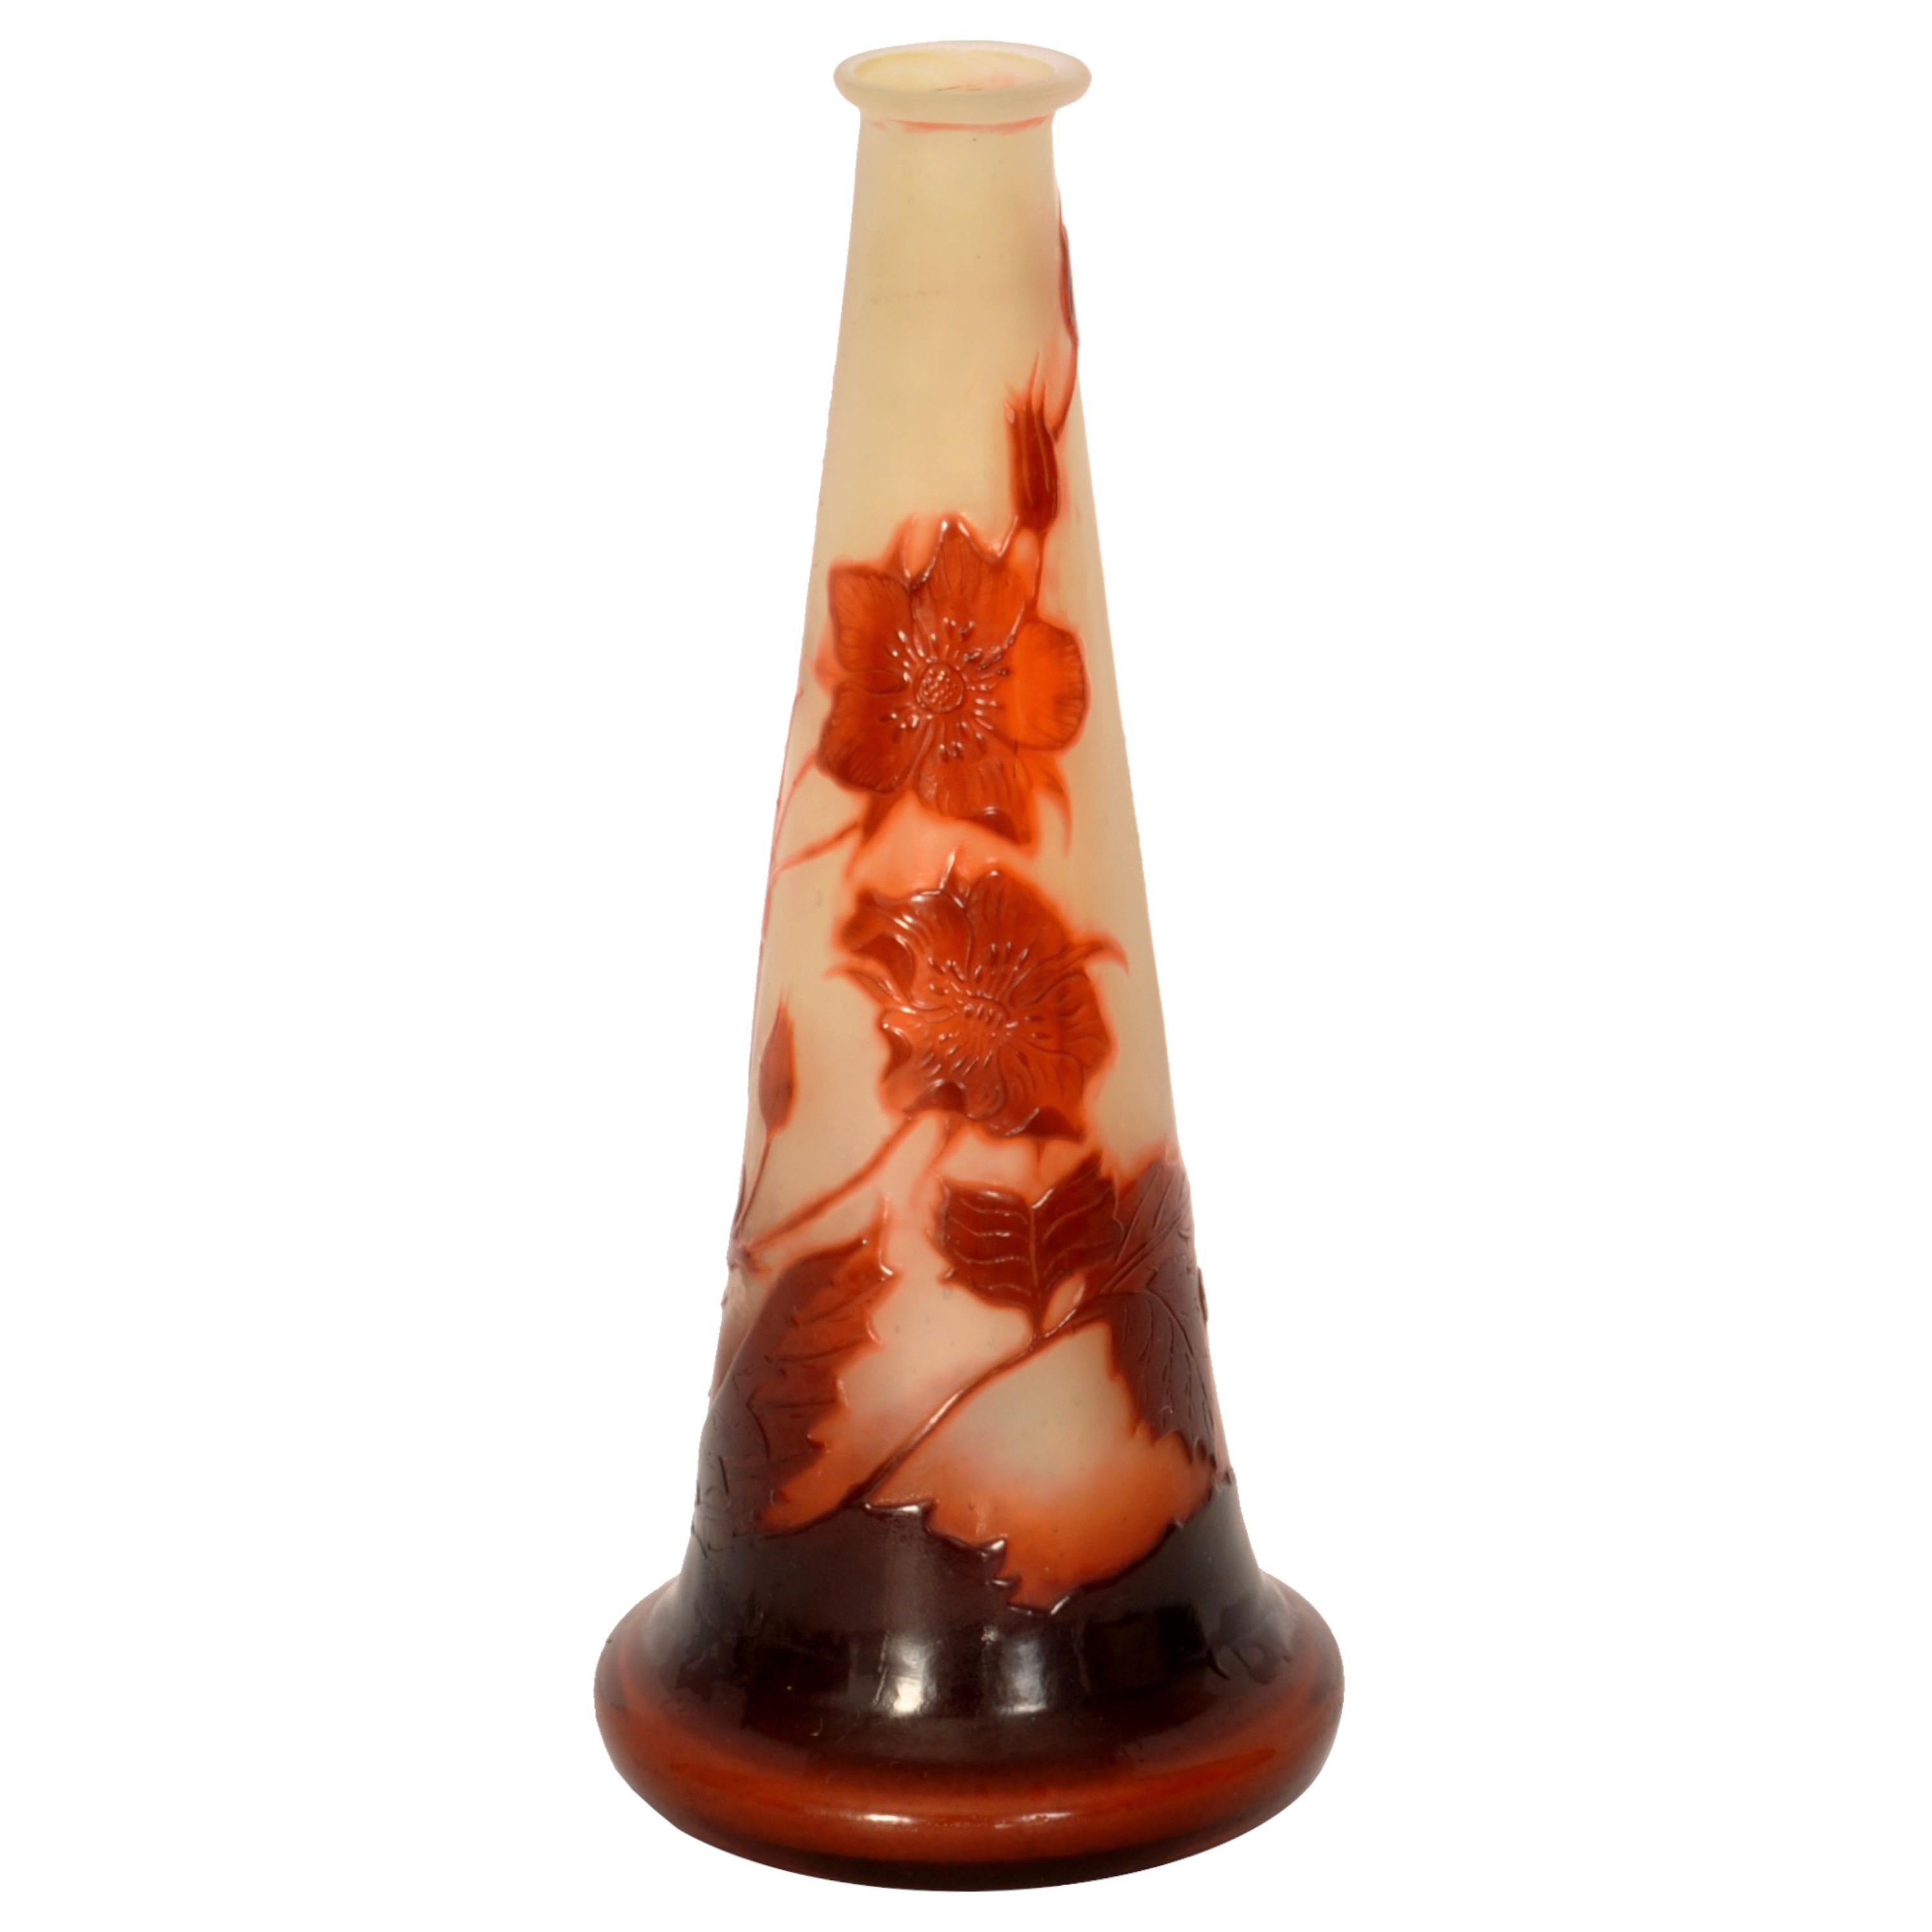 A fine antique French Art Nouveau Emille Galle cameo glass vase, circa 1900.
The stem vase of a tapering conical form and finely wheel carved and acid etched & fire polished, the cameo decoration of burgundy colored fuchias with trailing foliate,